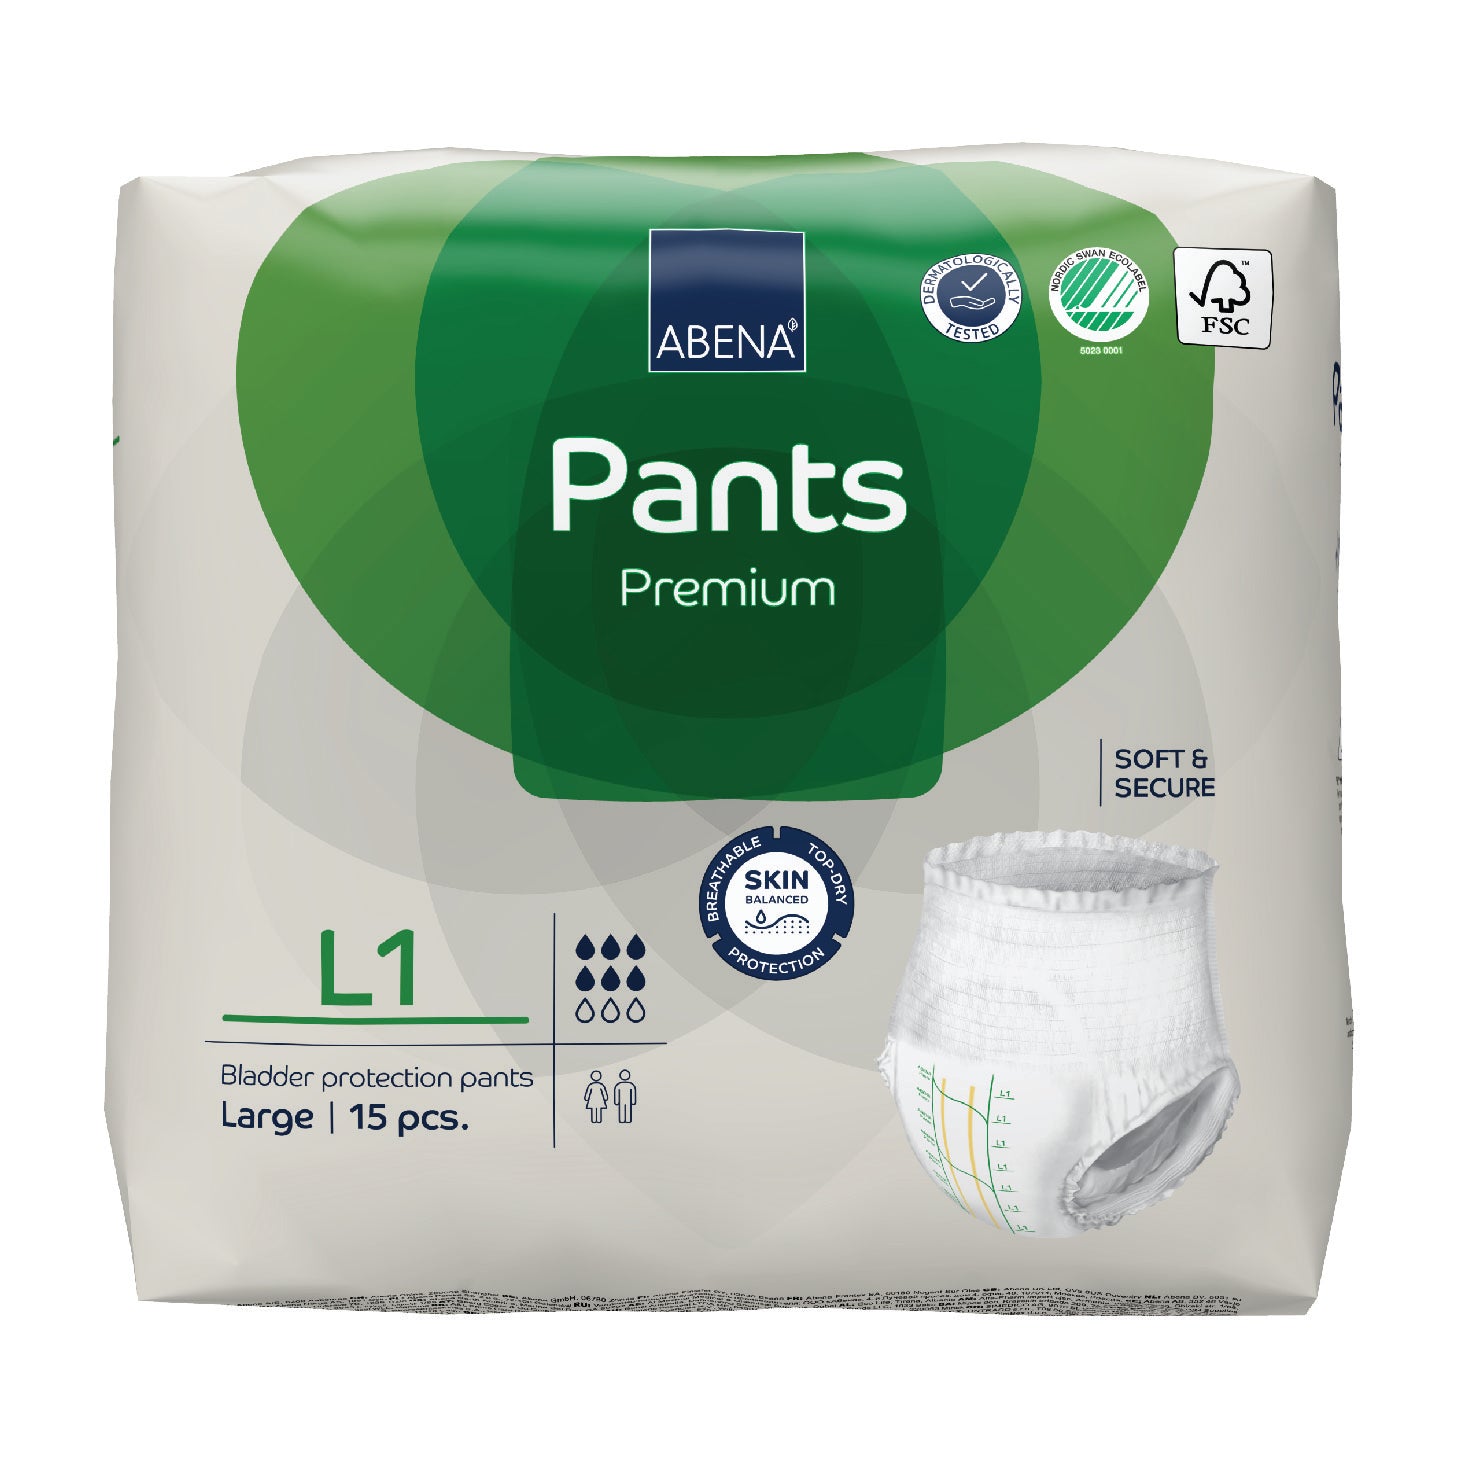 Dr brown's Adult diaper is 100% secure and comfortable and it gives you  that extra reassurance. Remain free and comfortable with the D